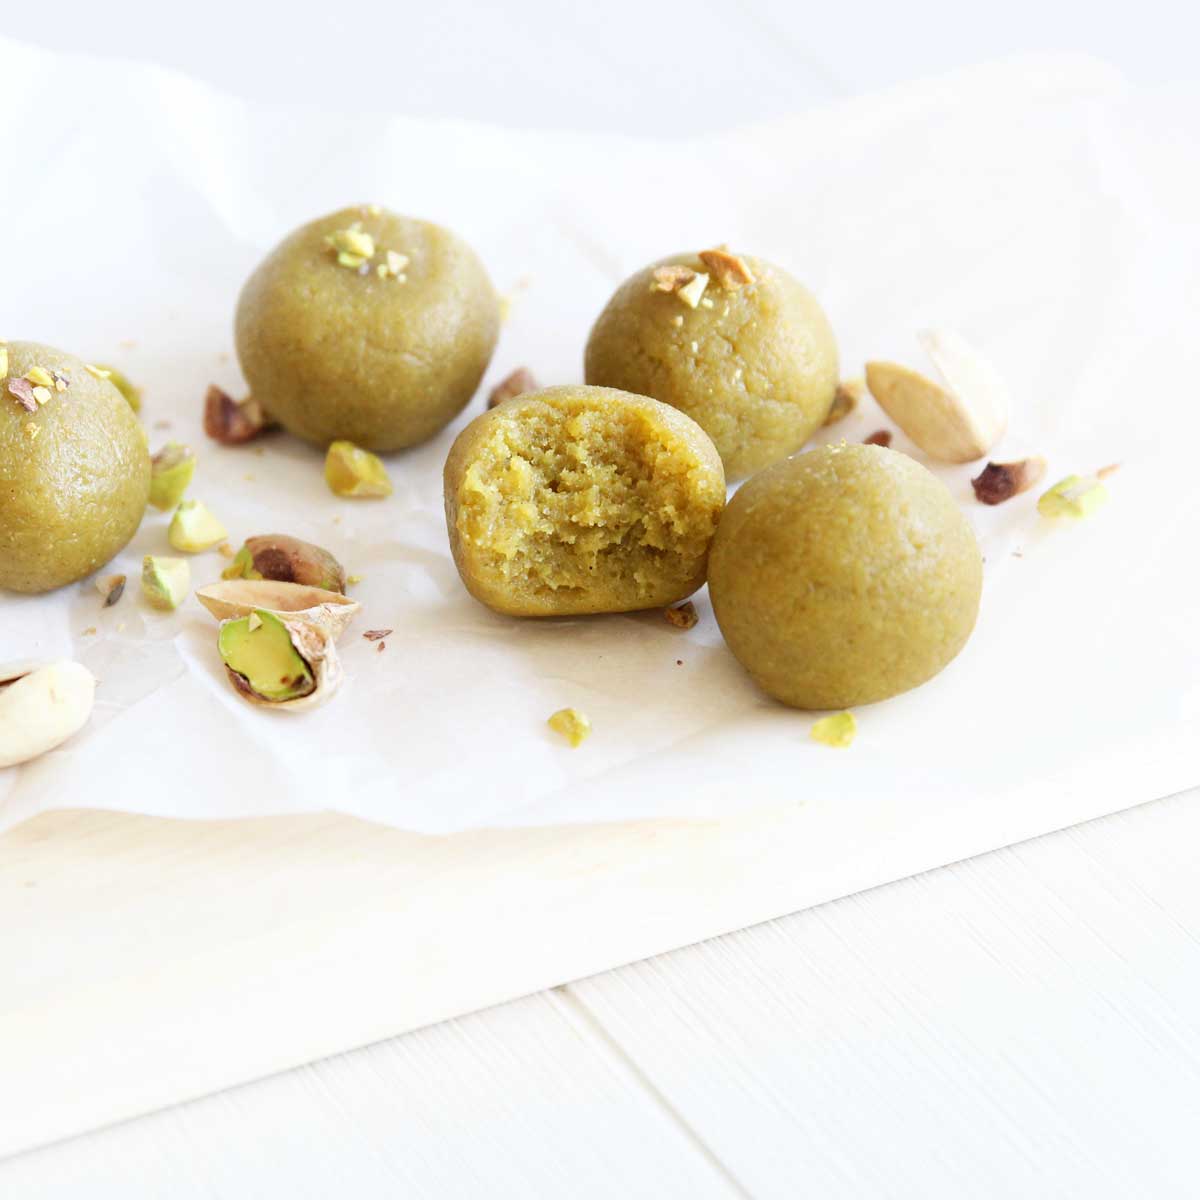 Keto Pistachio Cheesecake Protein Balls (Low Carb Energy Bites made with Collagen Peptides) - Lemon Cheesecake Protein Balls